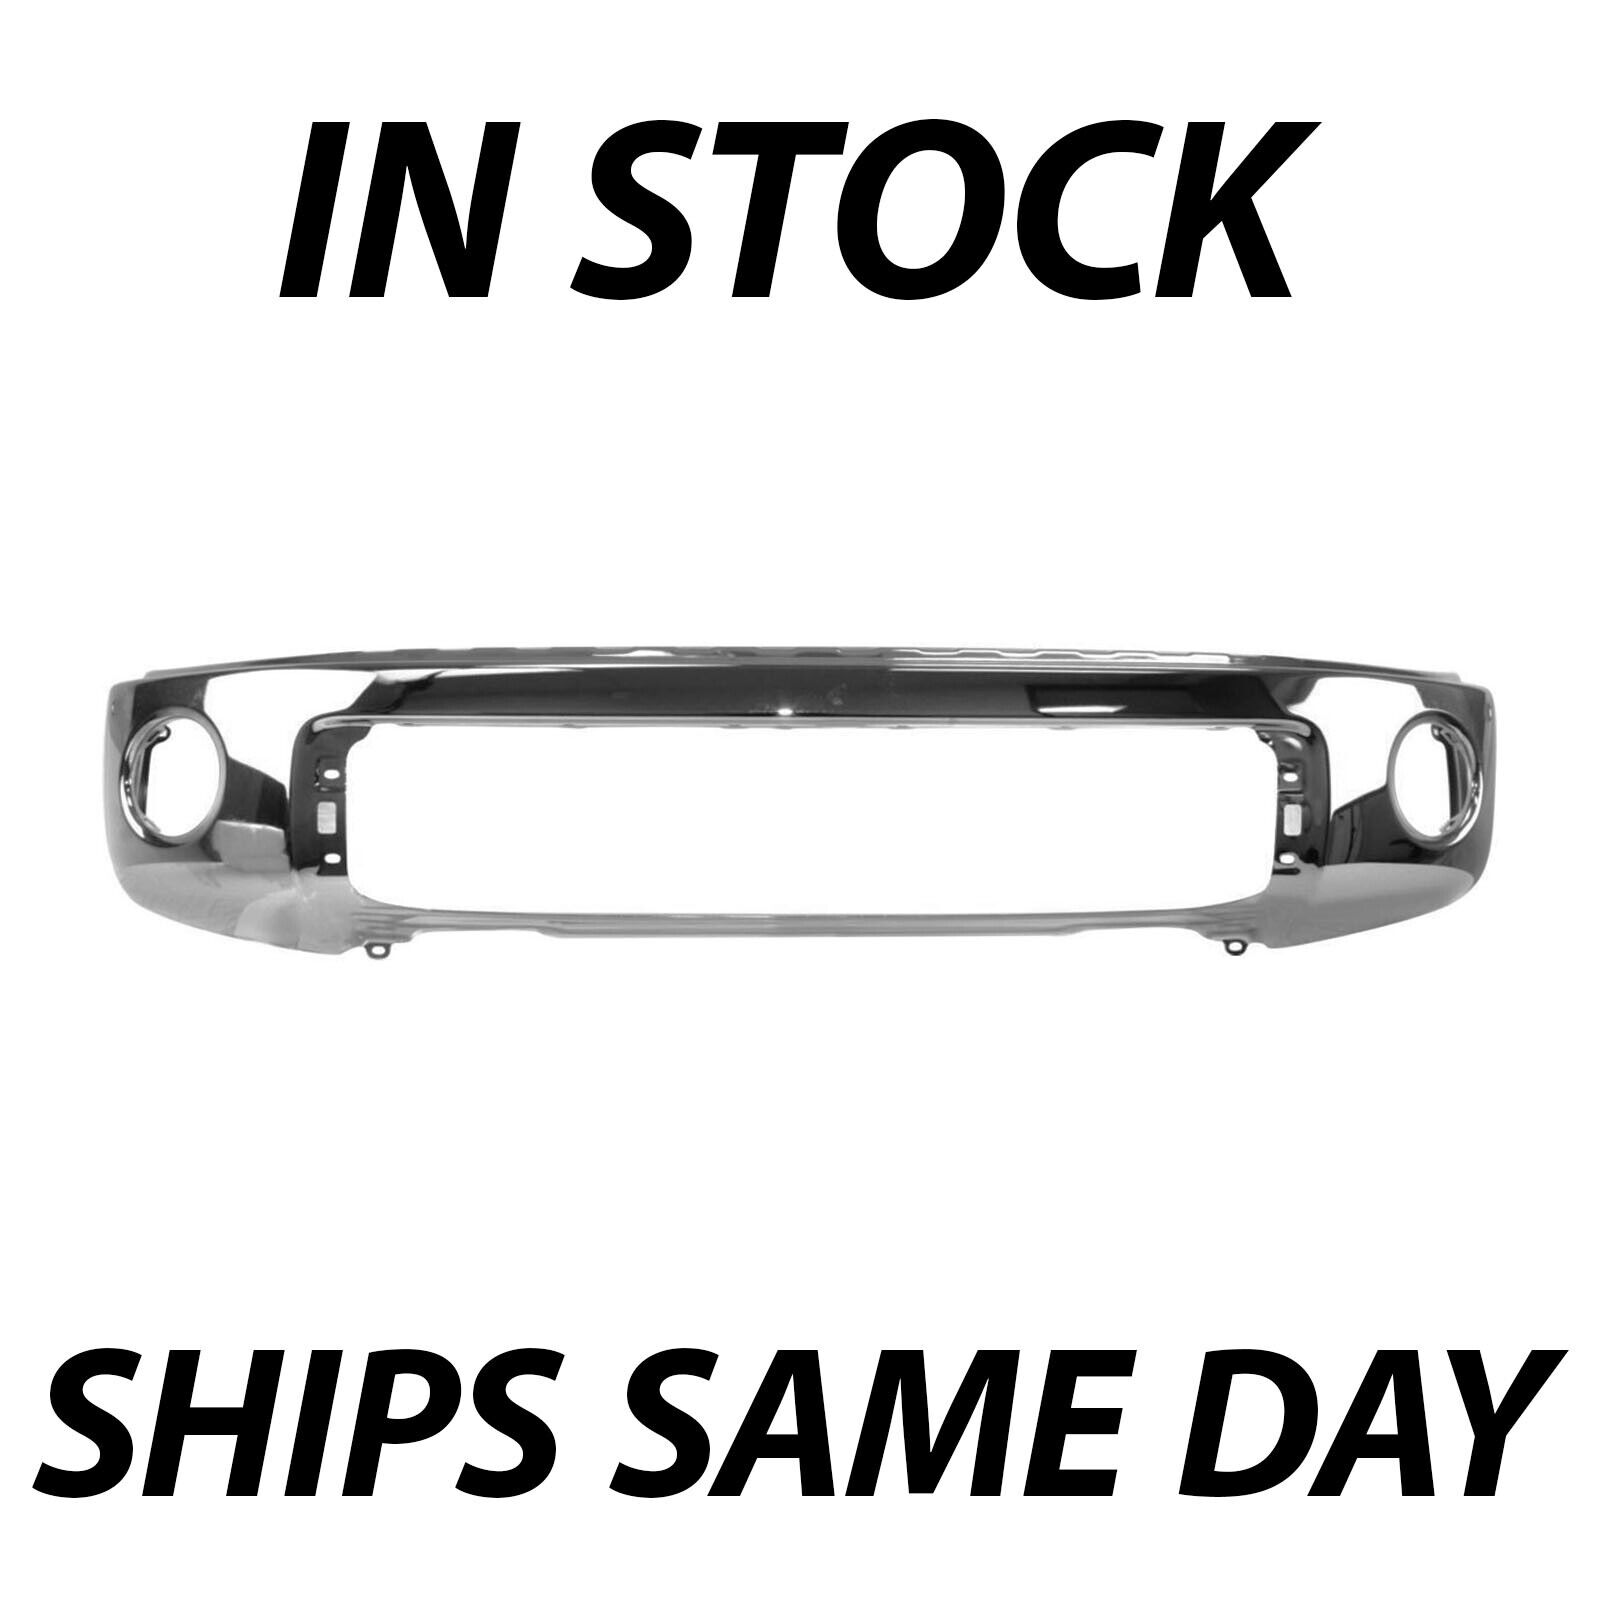 NEW Chrome - Steel Front Bumper for 2007-2013 Toyota Tundra Truck W/ Park Assist